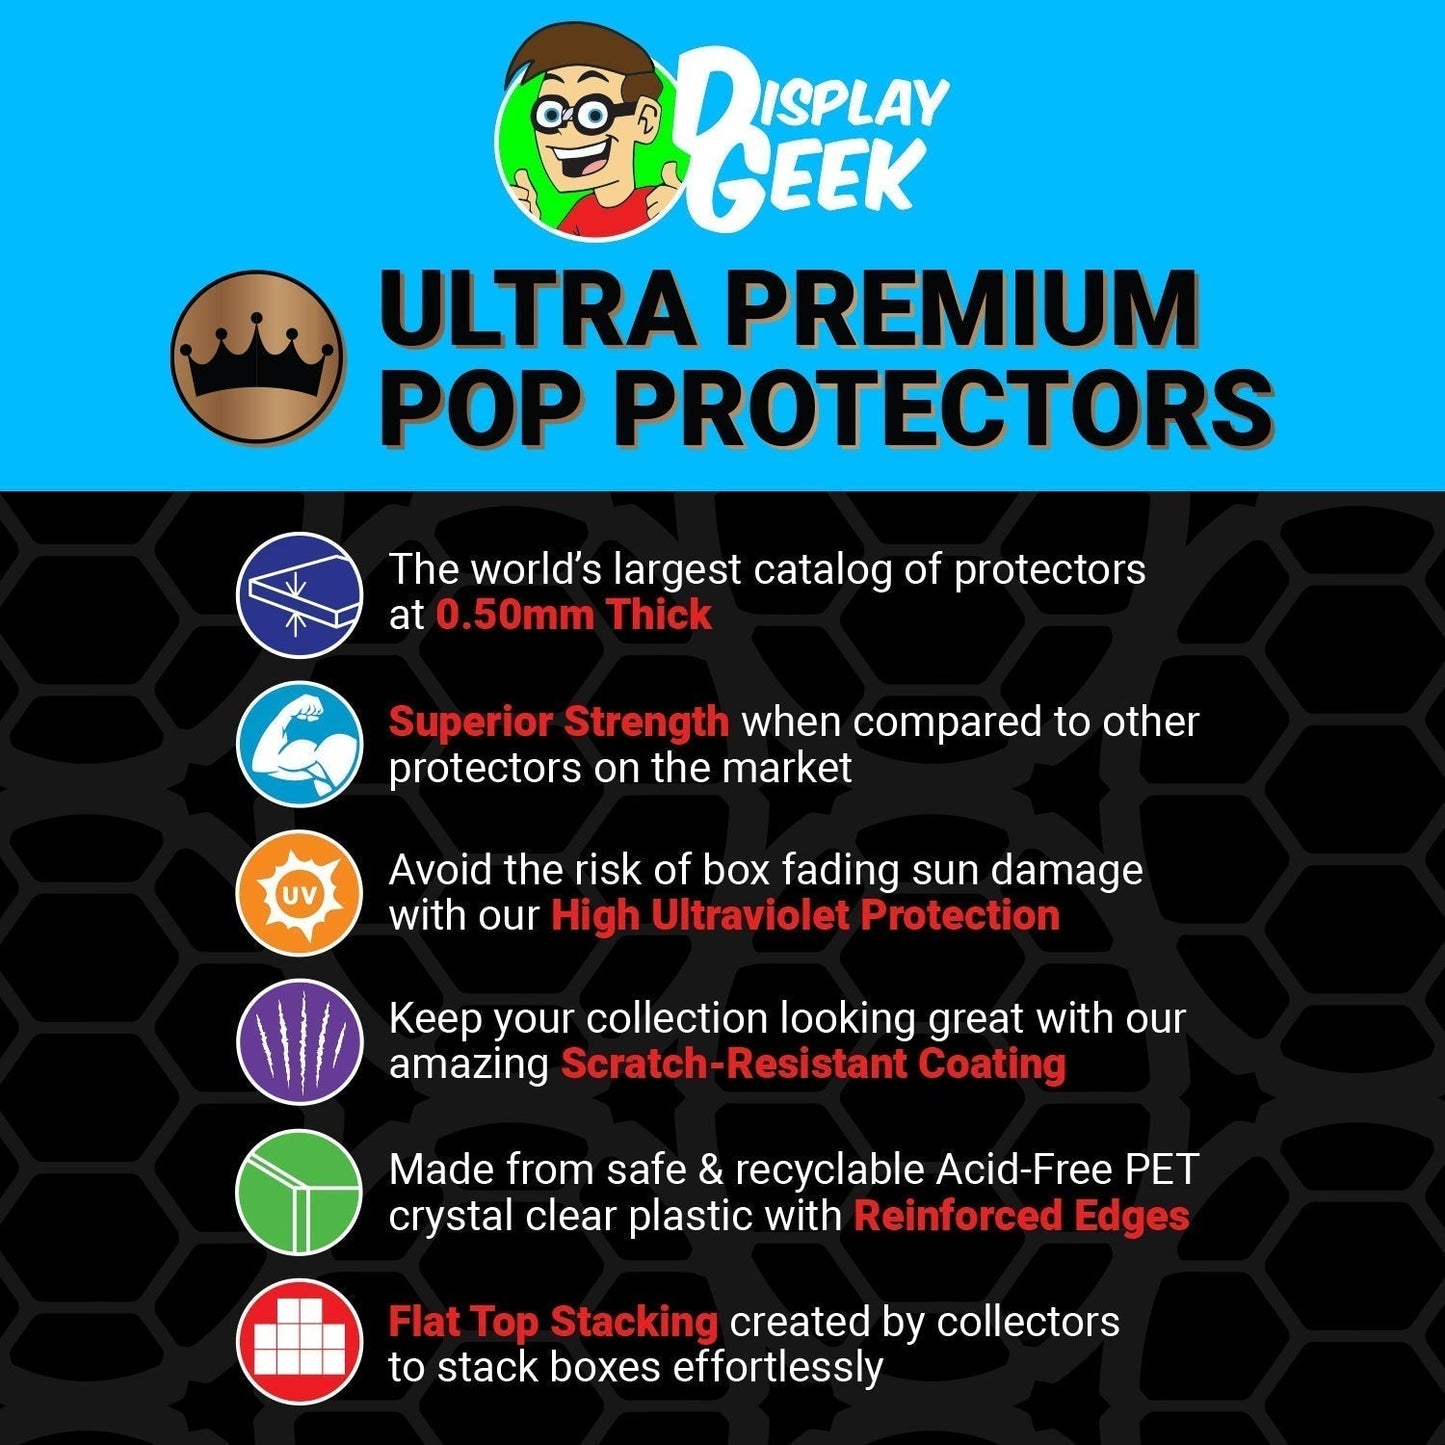 Pop Protector for Amazing Carlos D-Con FunkO's Cereal Box - PPG Pop Protector Guide Search Created by Display Geek